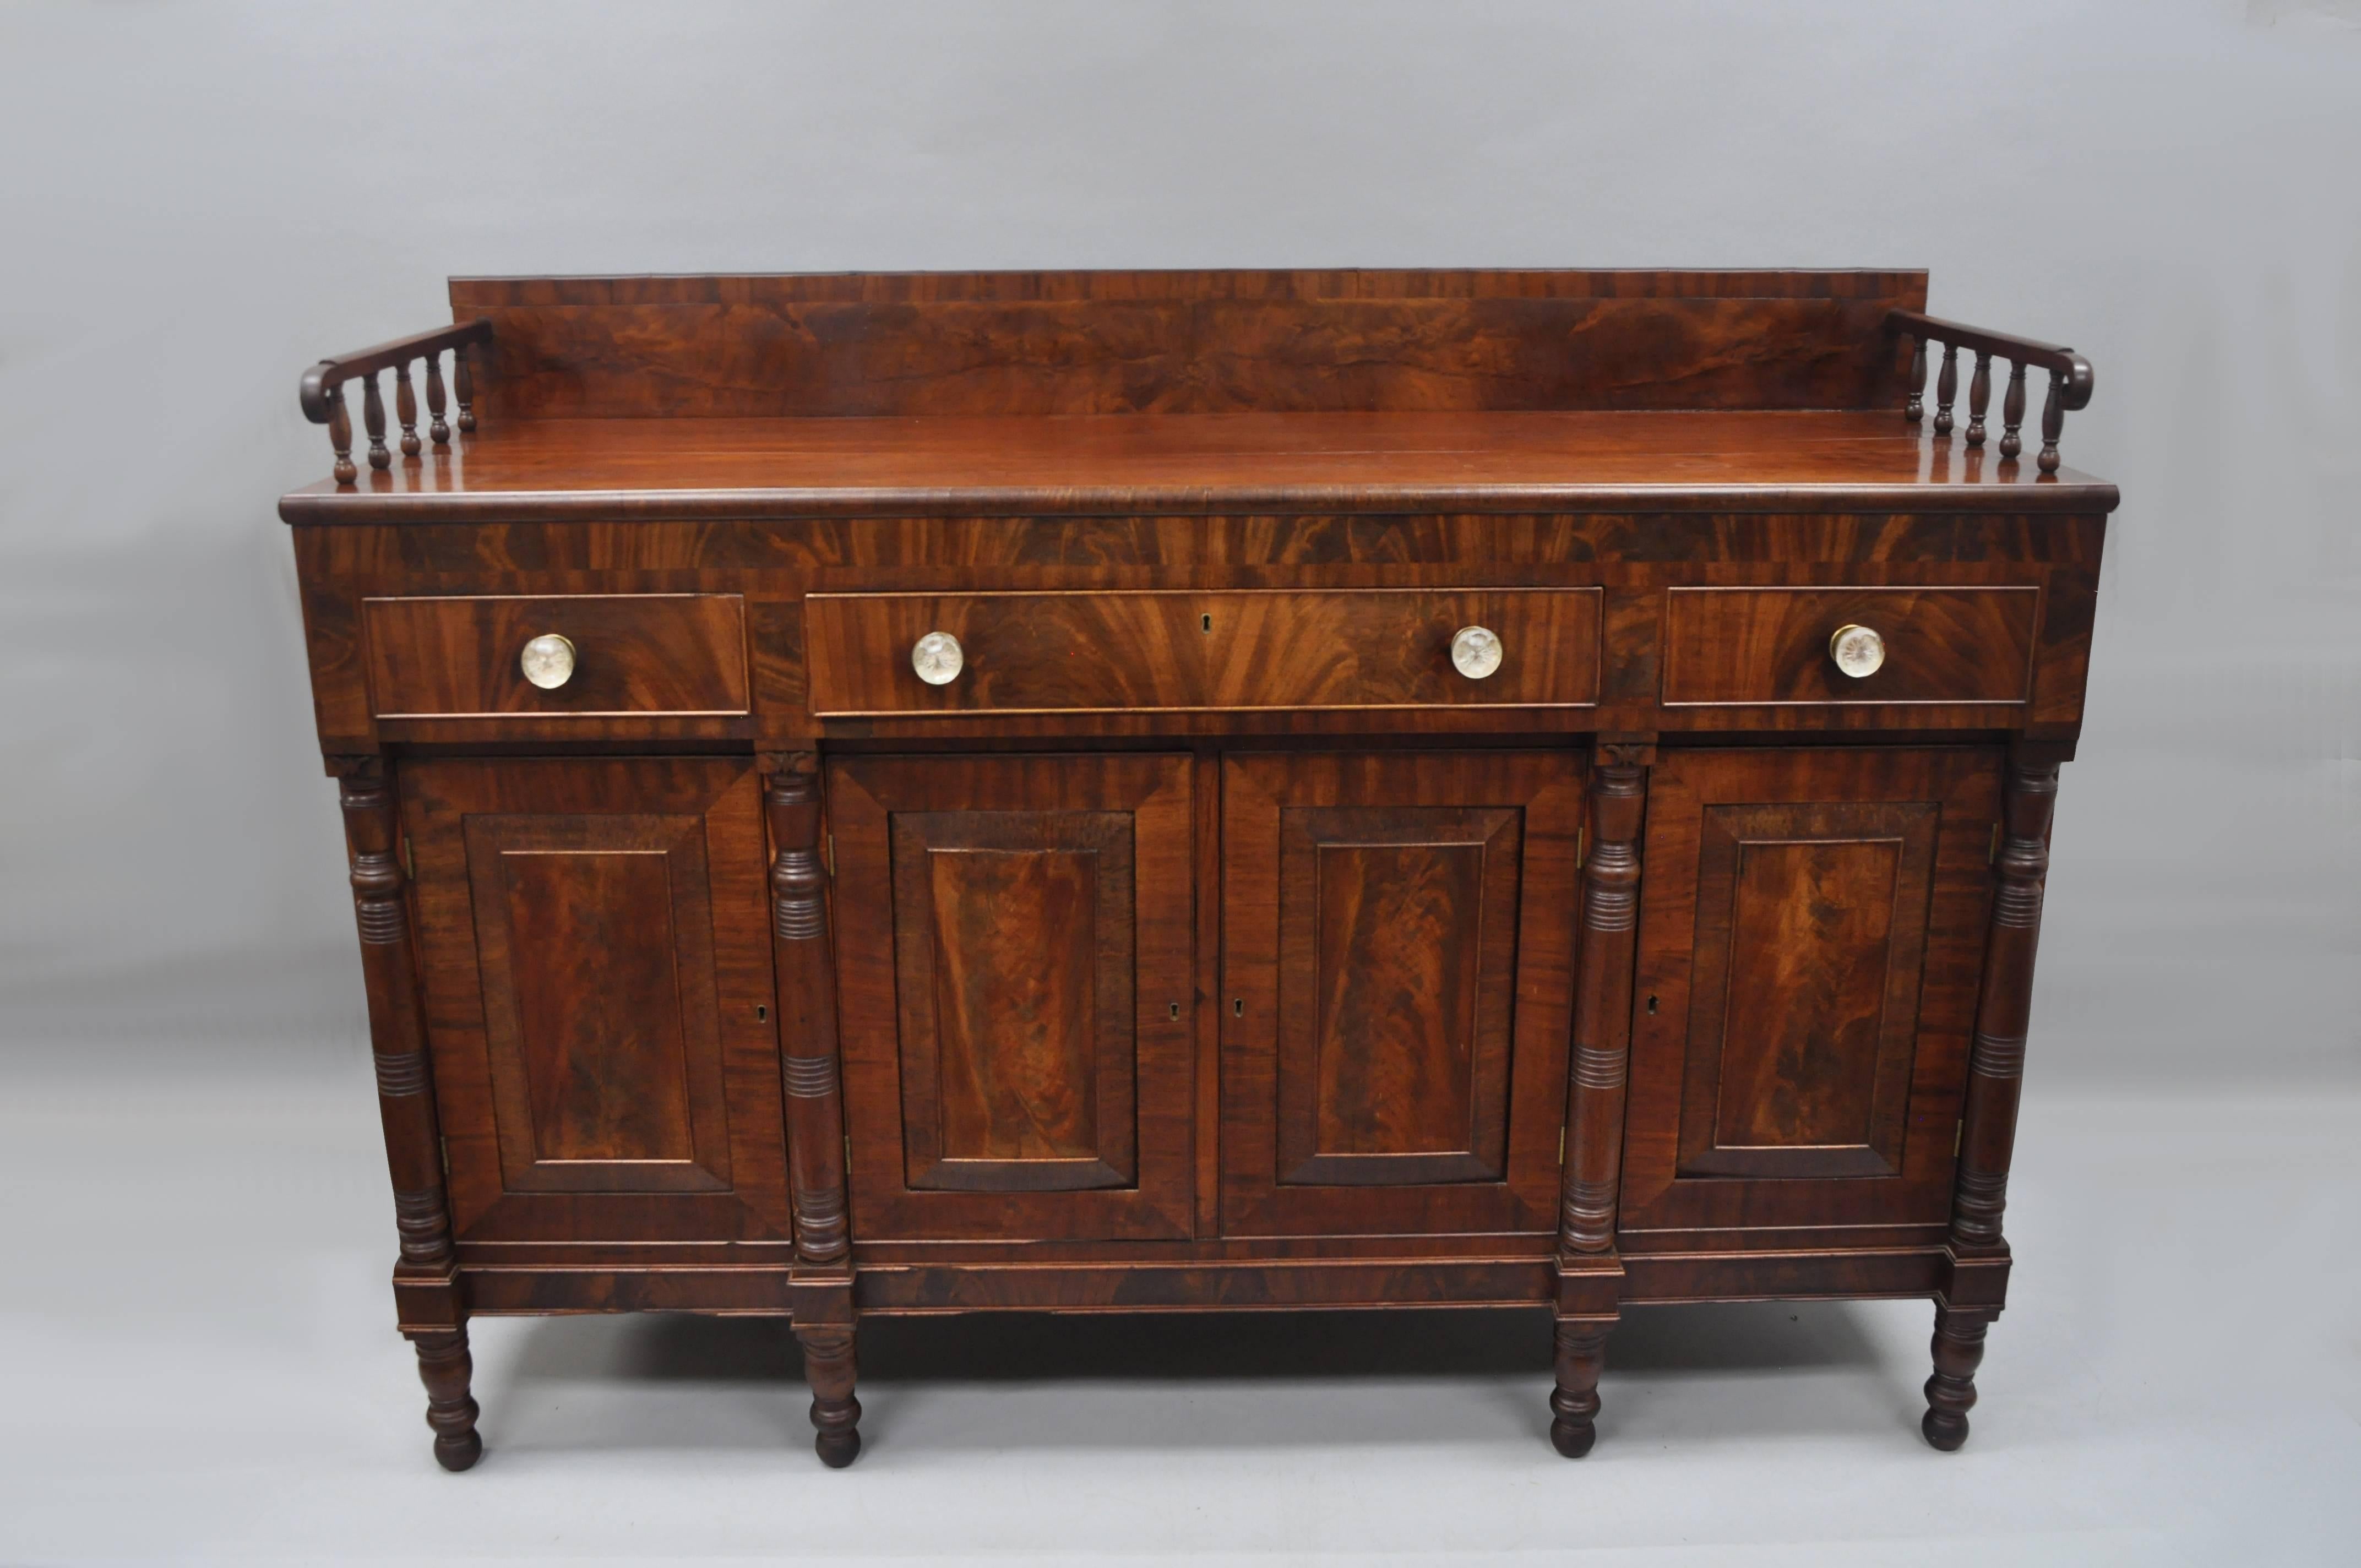 Early 19th Century Large Antique American Empire Sideboard in Crotch Flame Mahogany with 2 pull out surfaces on the sides. Item features beautiful crotch mahogany wood veneer, tall back splash with spindle sides, glass knob pulls, turn carved legs